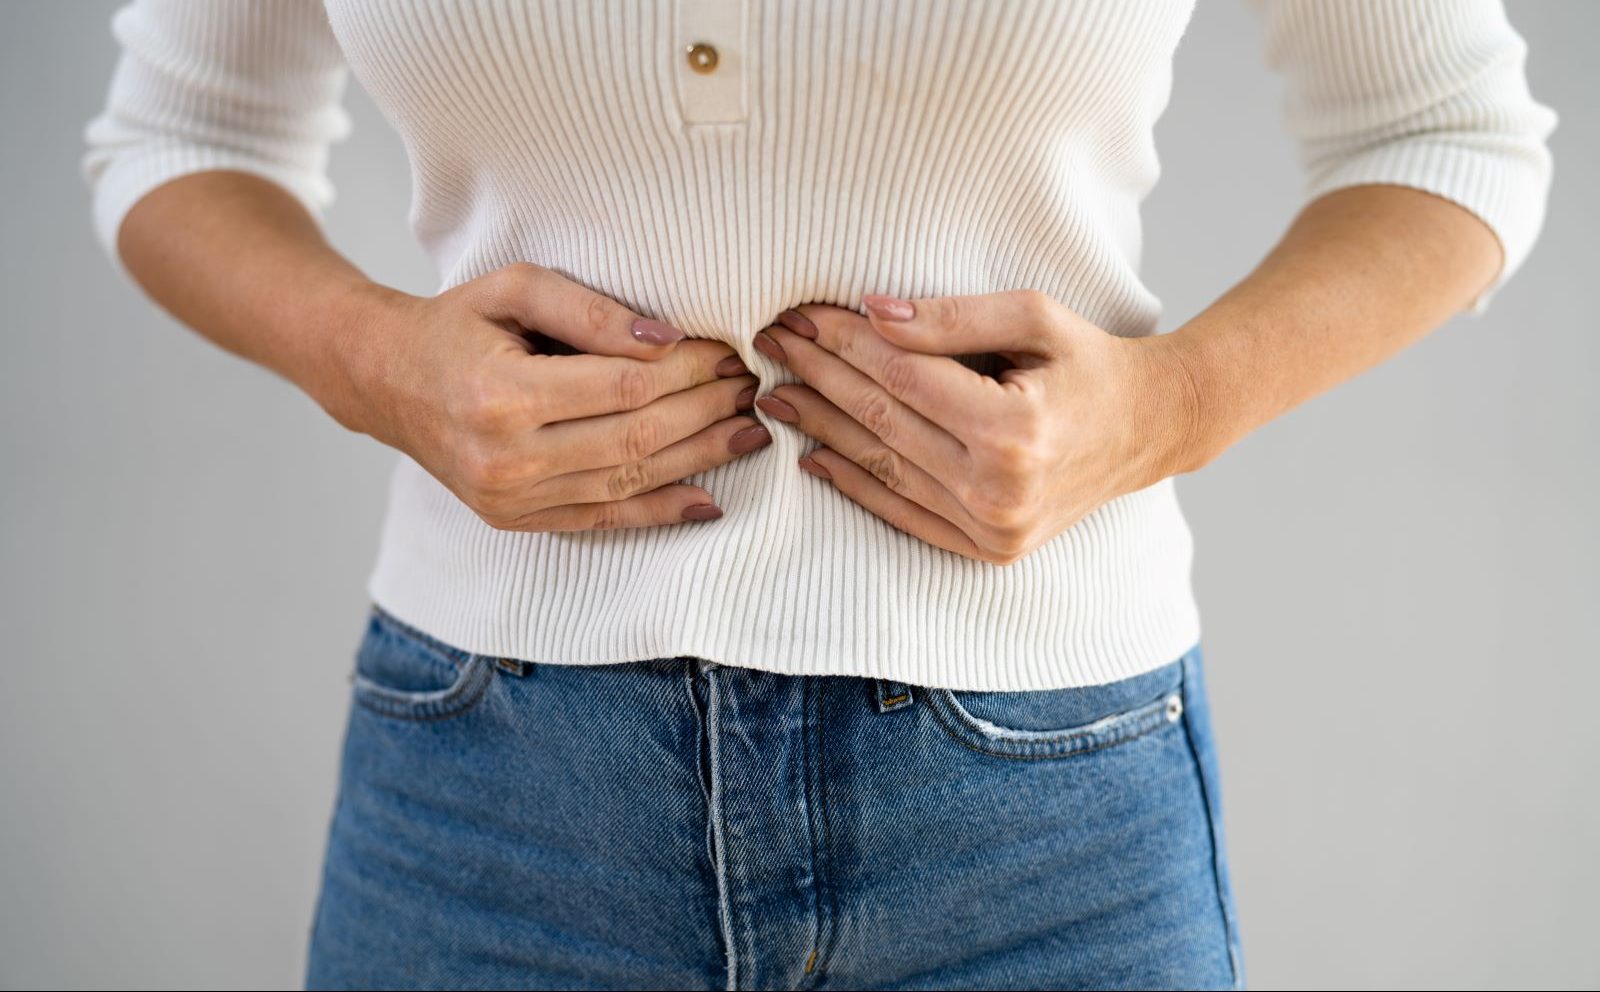 A 47-year-old thought her digestive issues were menopause, until she ended up in the emergency room battling colon cancer.